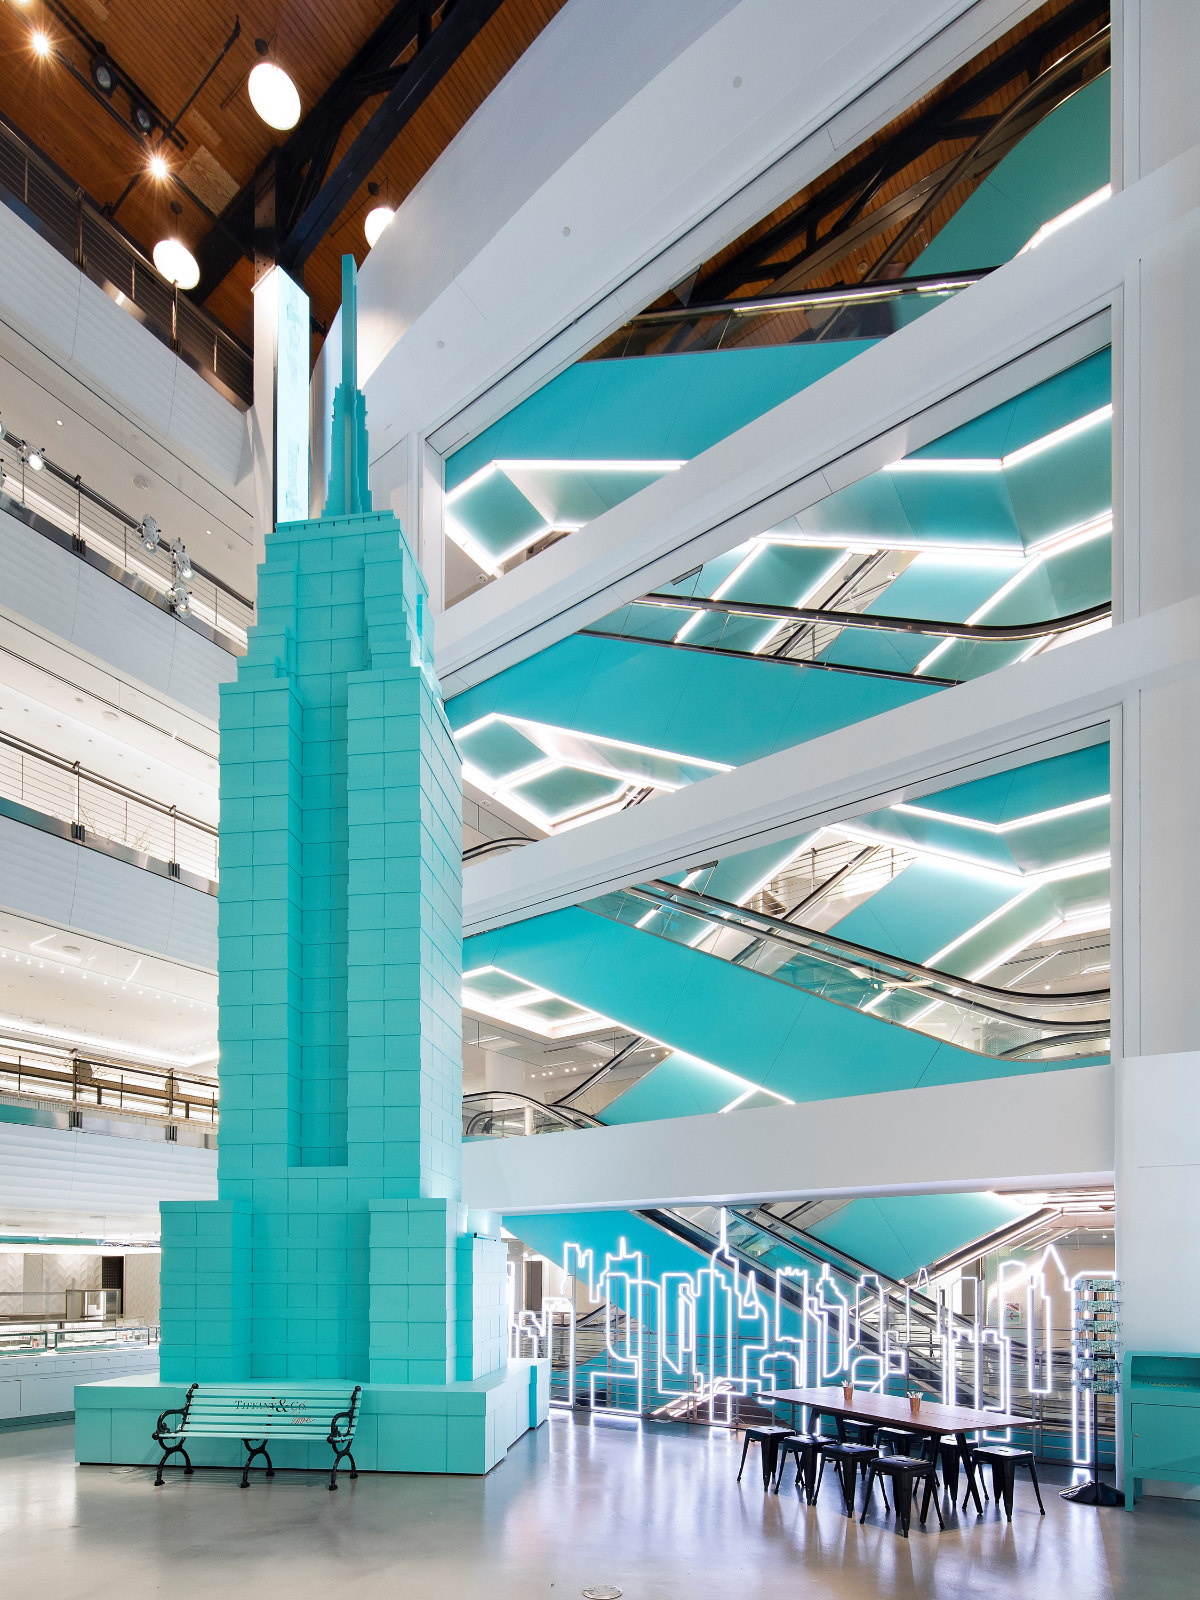 Tiffany & Co. Officially Opens The Tiffany Flagship Next Door @ 6 East 57th